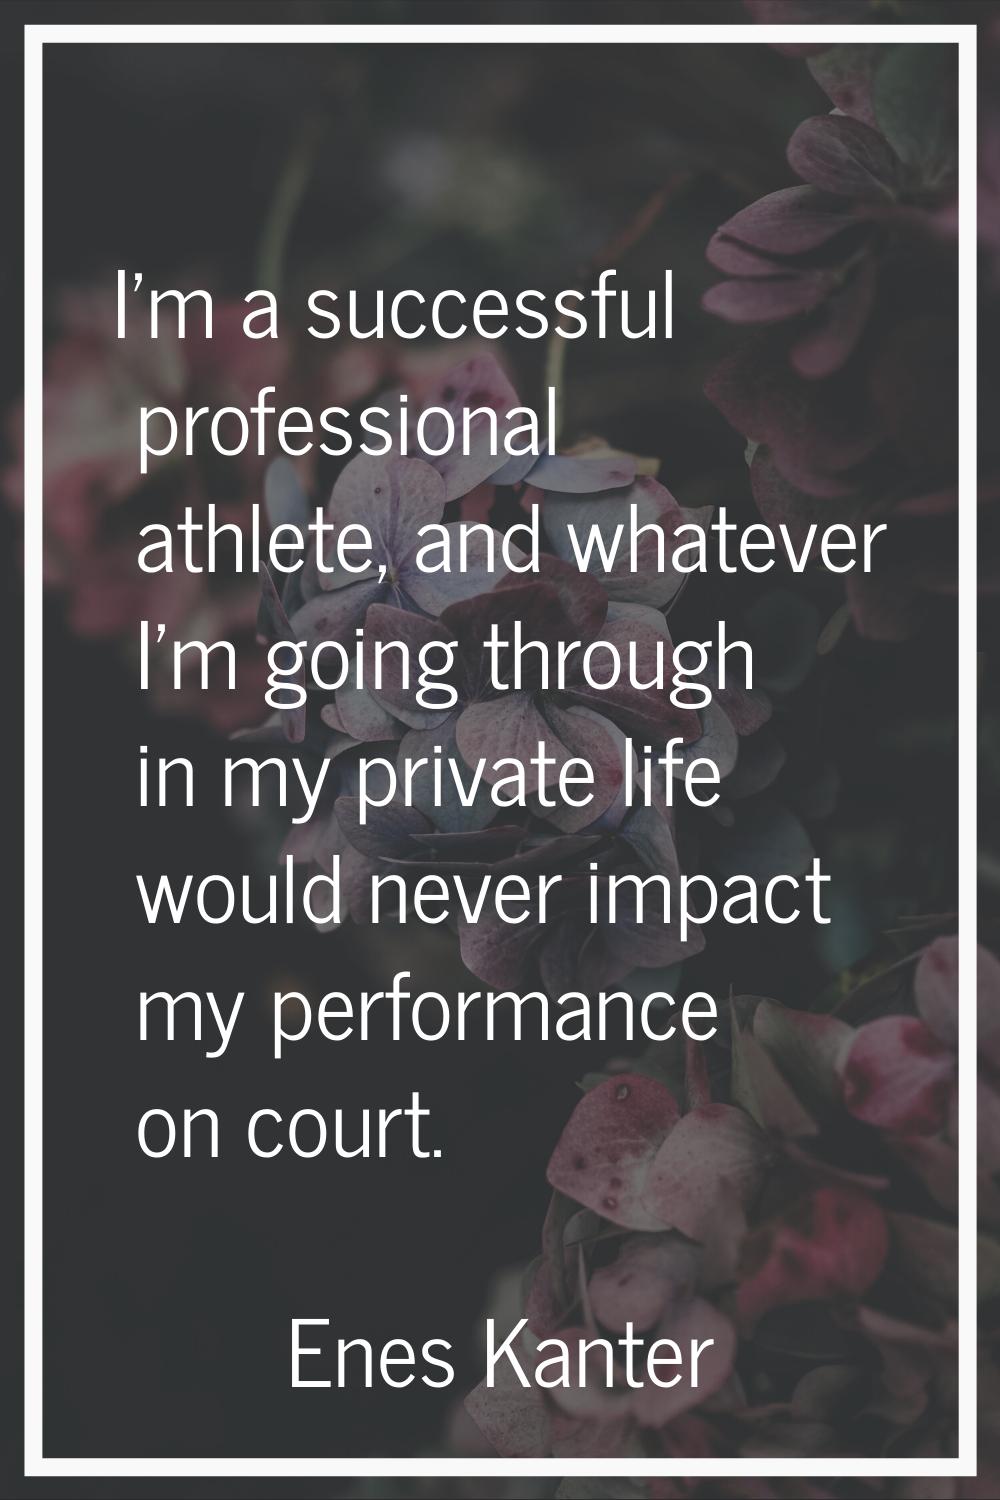 I’m a successful professional athlete, and whatever I’m going through in my private life would neve